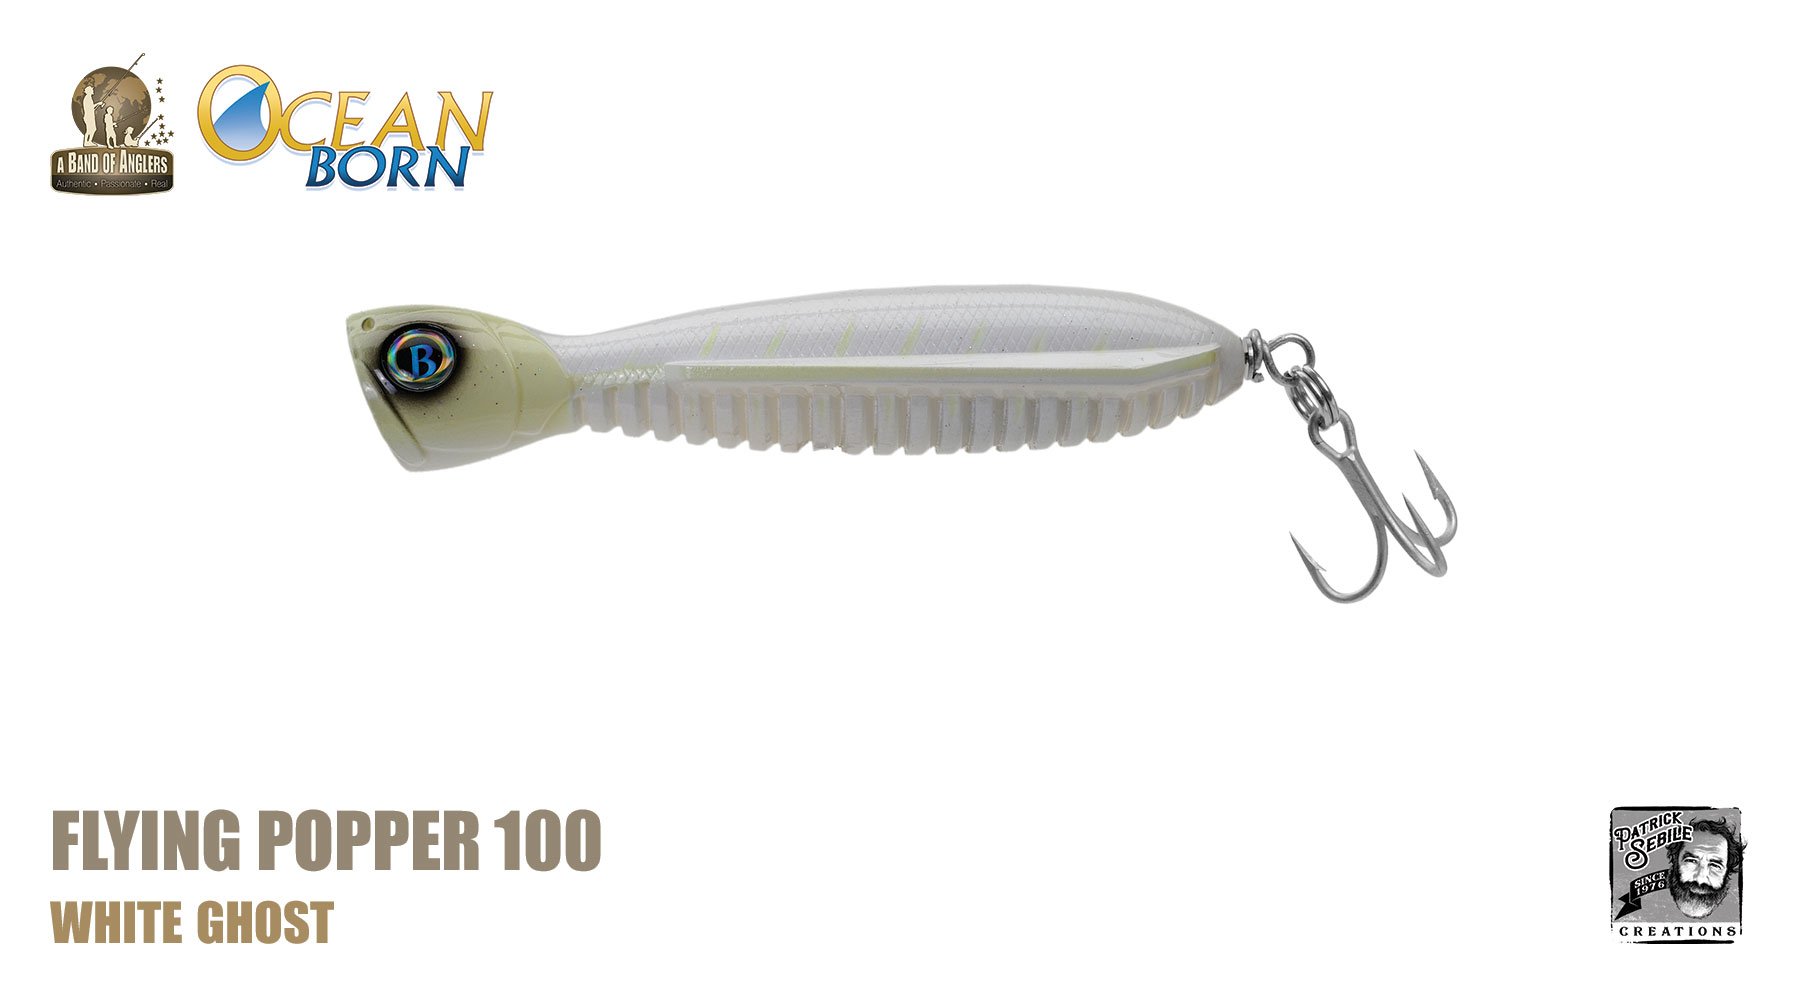 Flying Popper 100 – A Band of Anglers Inc.